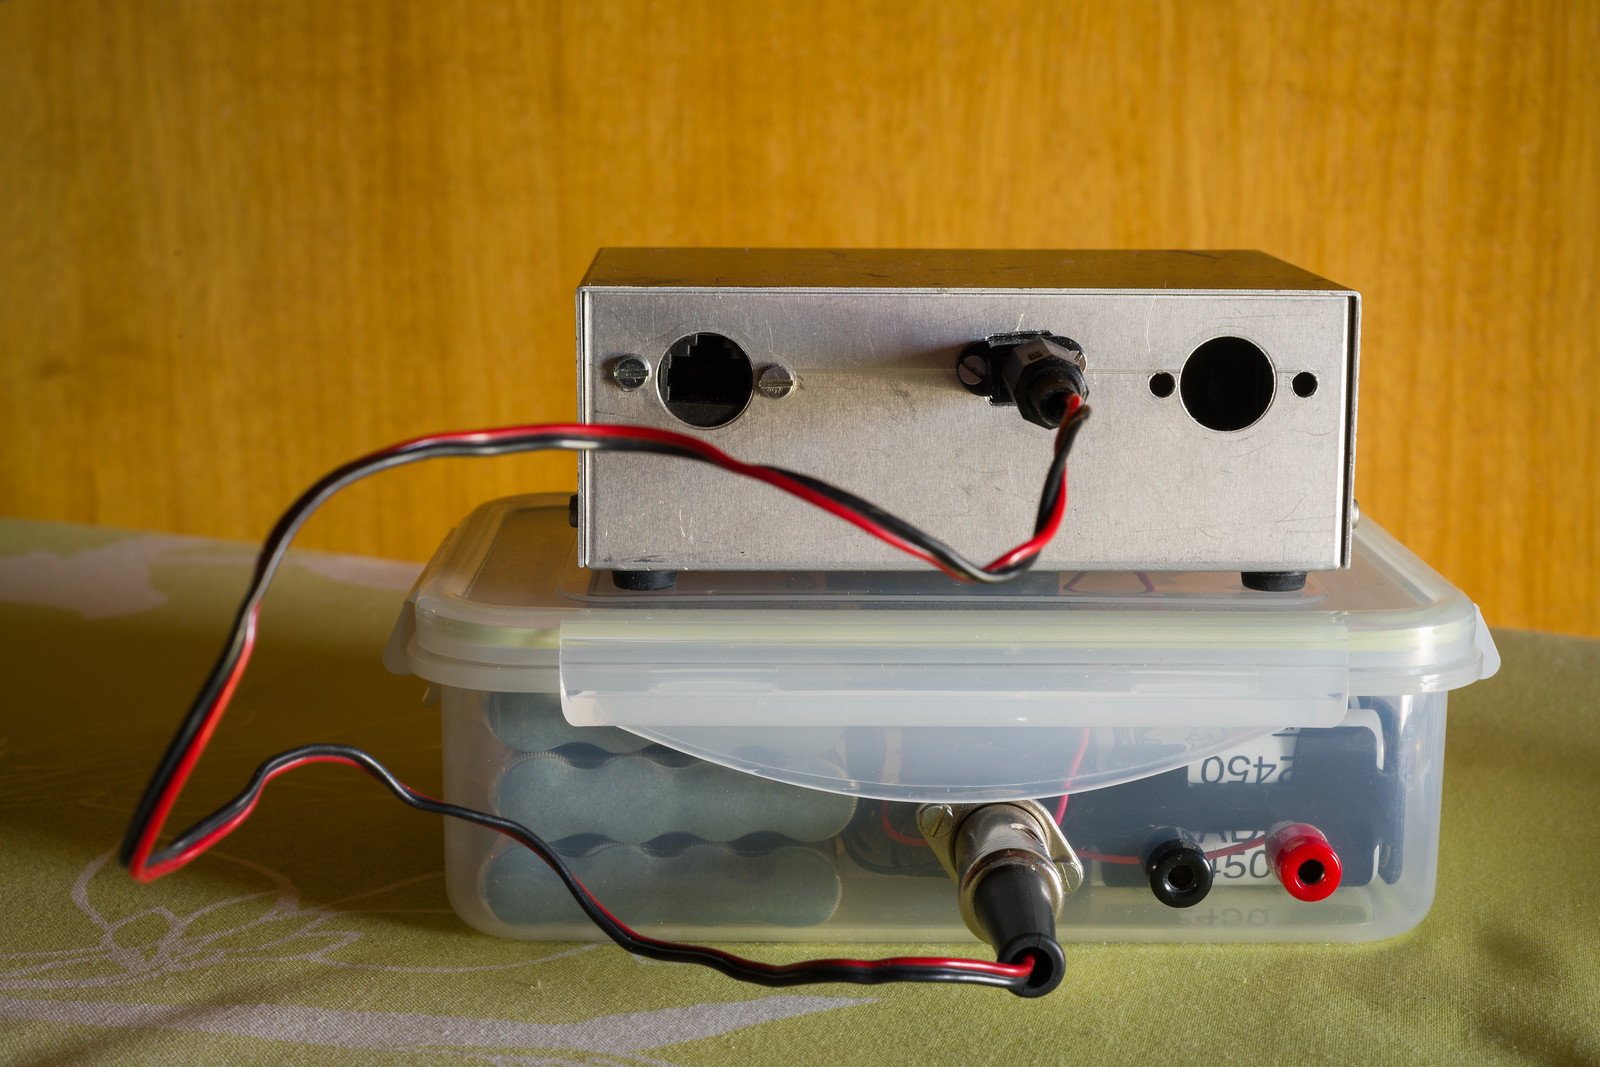 Control box with battery block underneath, rear view